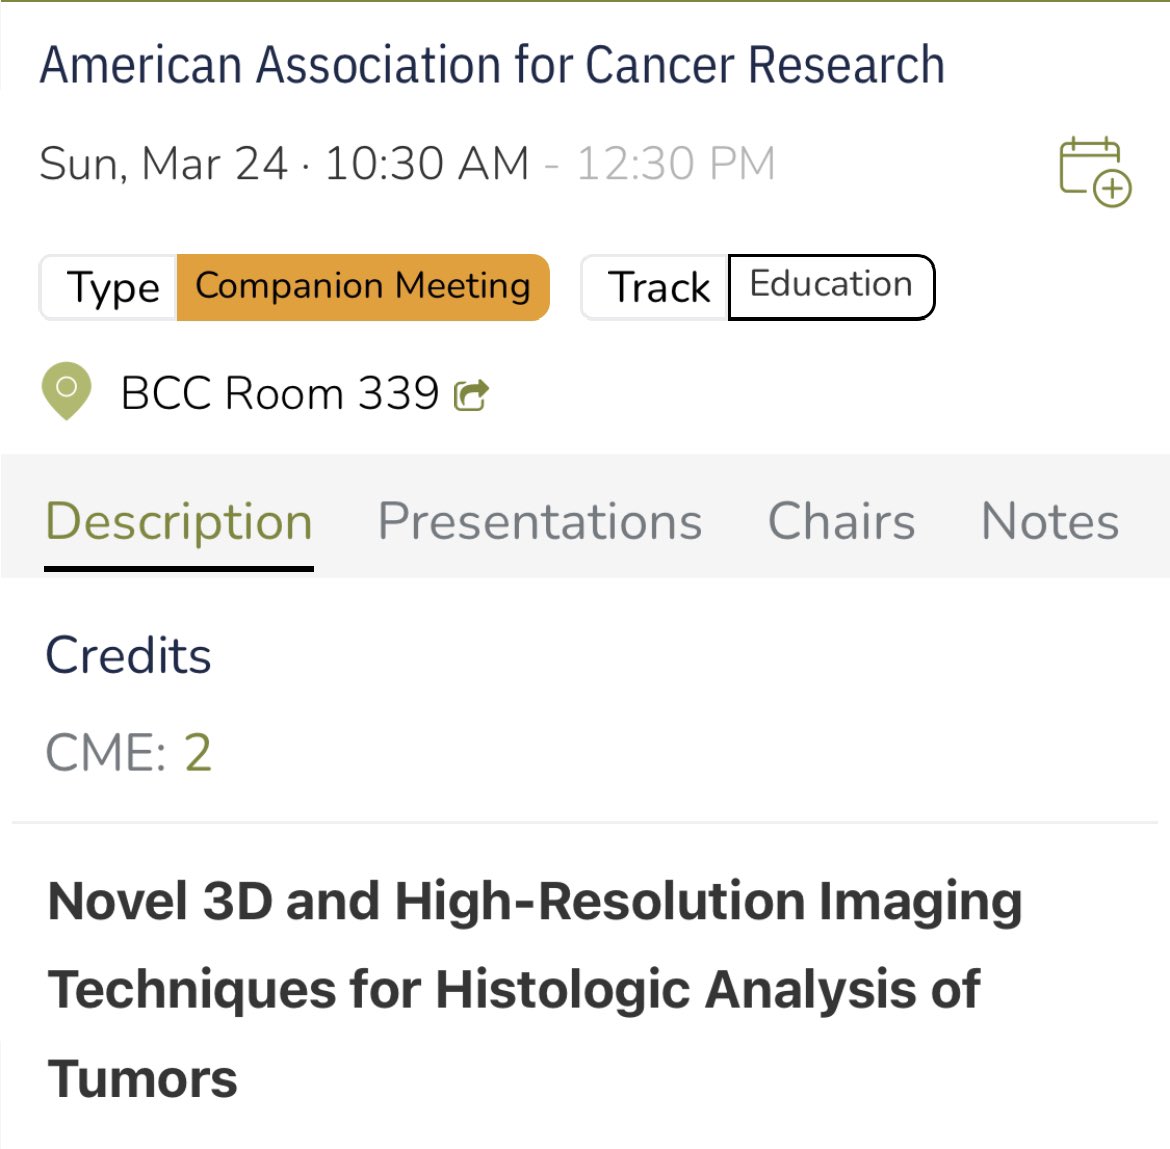 Highlighting @MSKPathology at #USCAP2024 Companion Society Mtgs 3/24 Dr. Yukako Yagi: “Evaluating New Tech to Advance Digital Pathology in a Clinical Setting & Developing Clinical Applicability” in @AACR session on Novel 3D & High-Res Imaging Techniques for Histologic Analysis